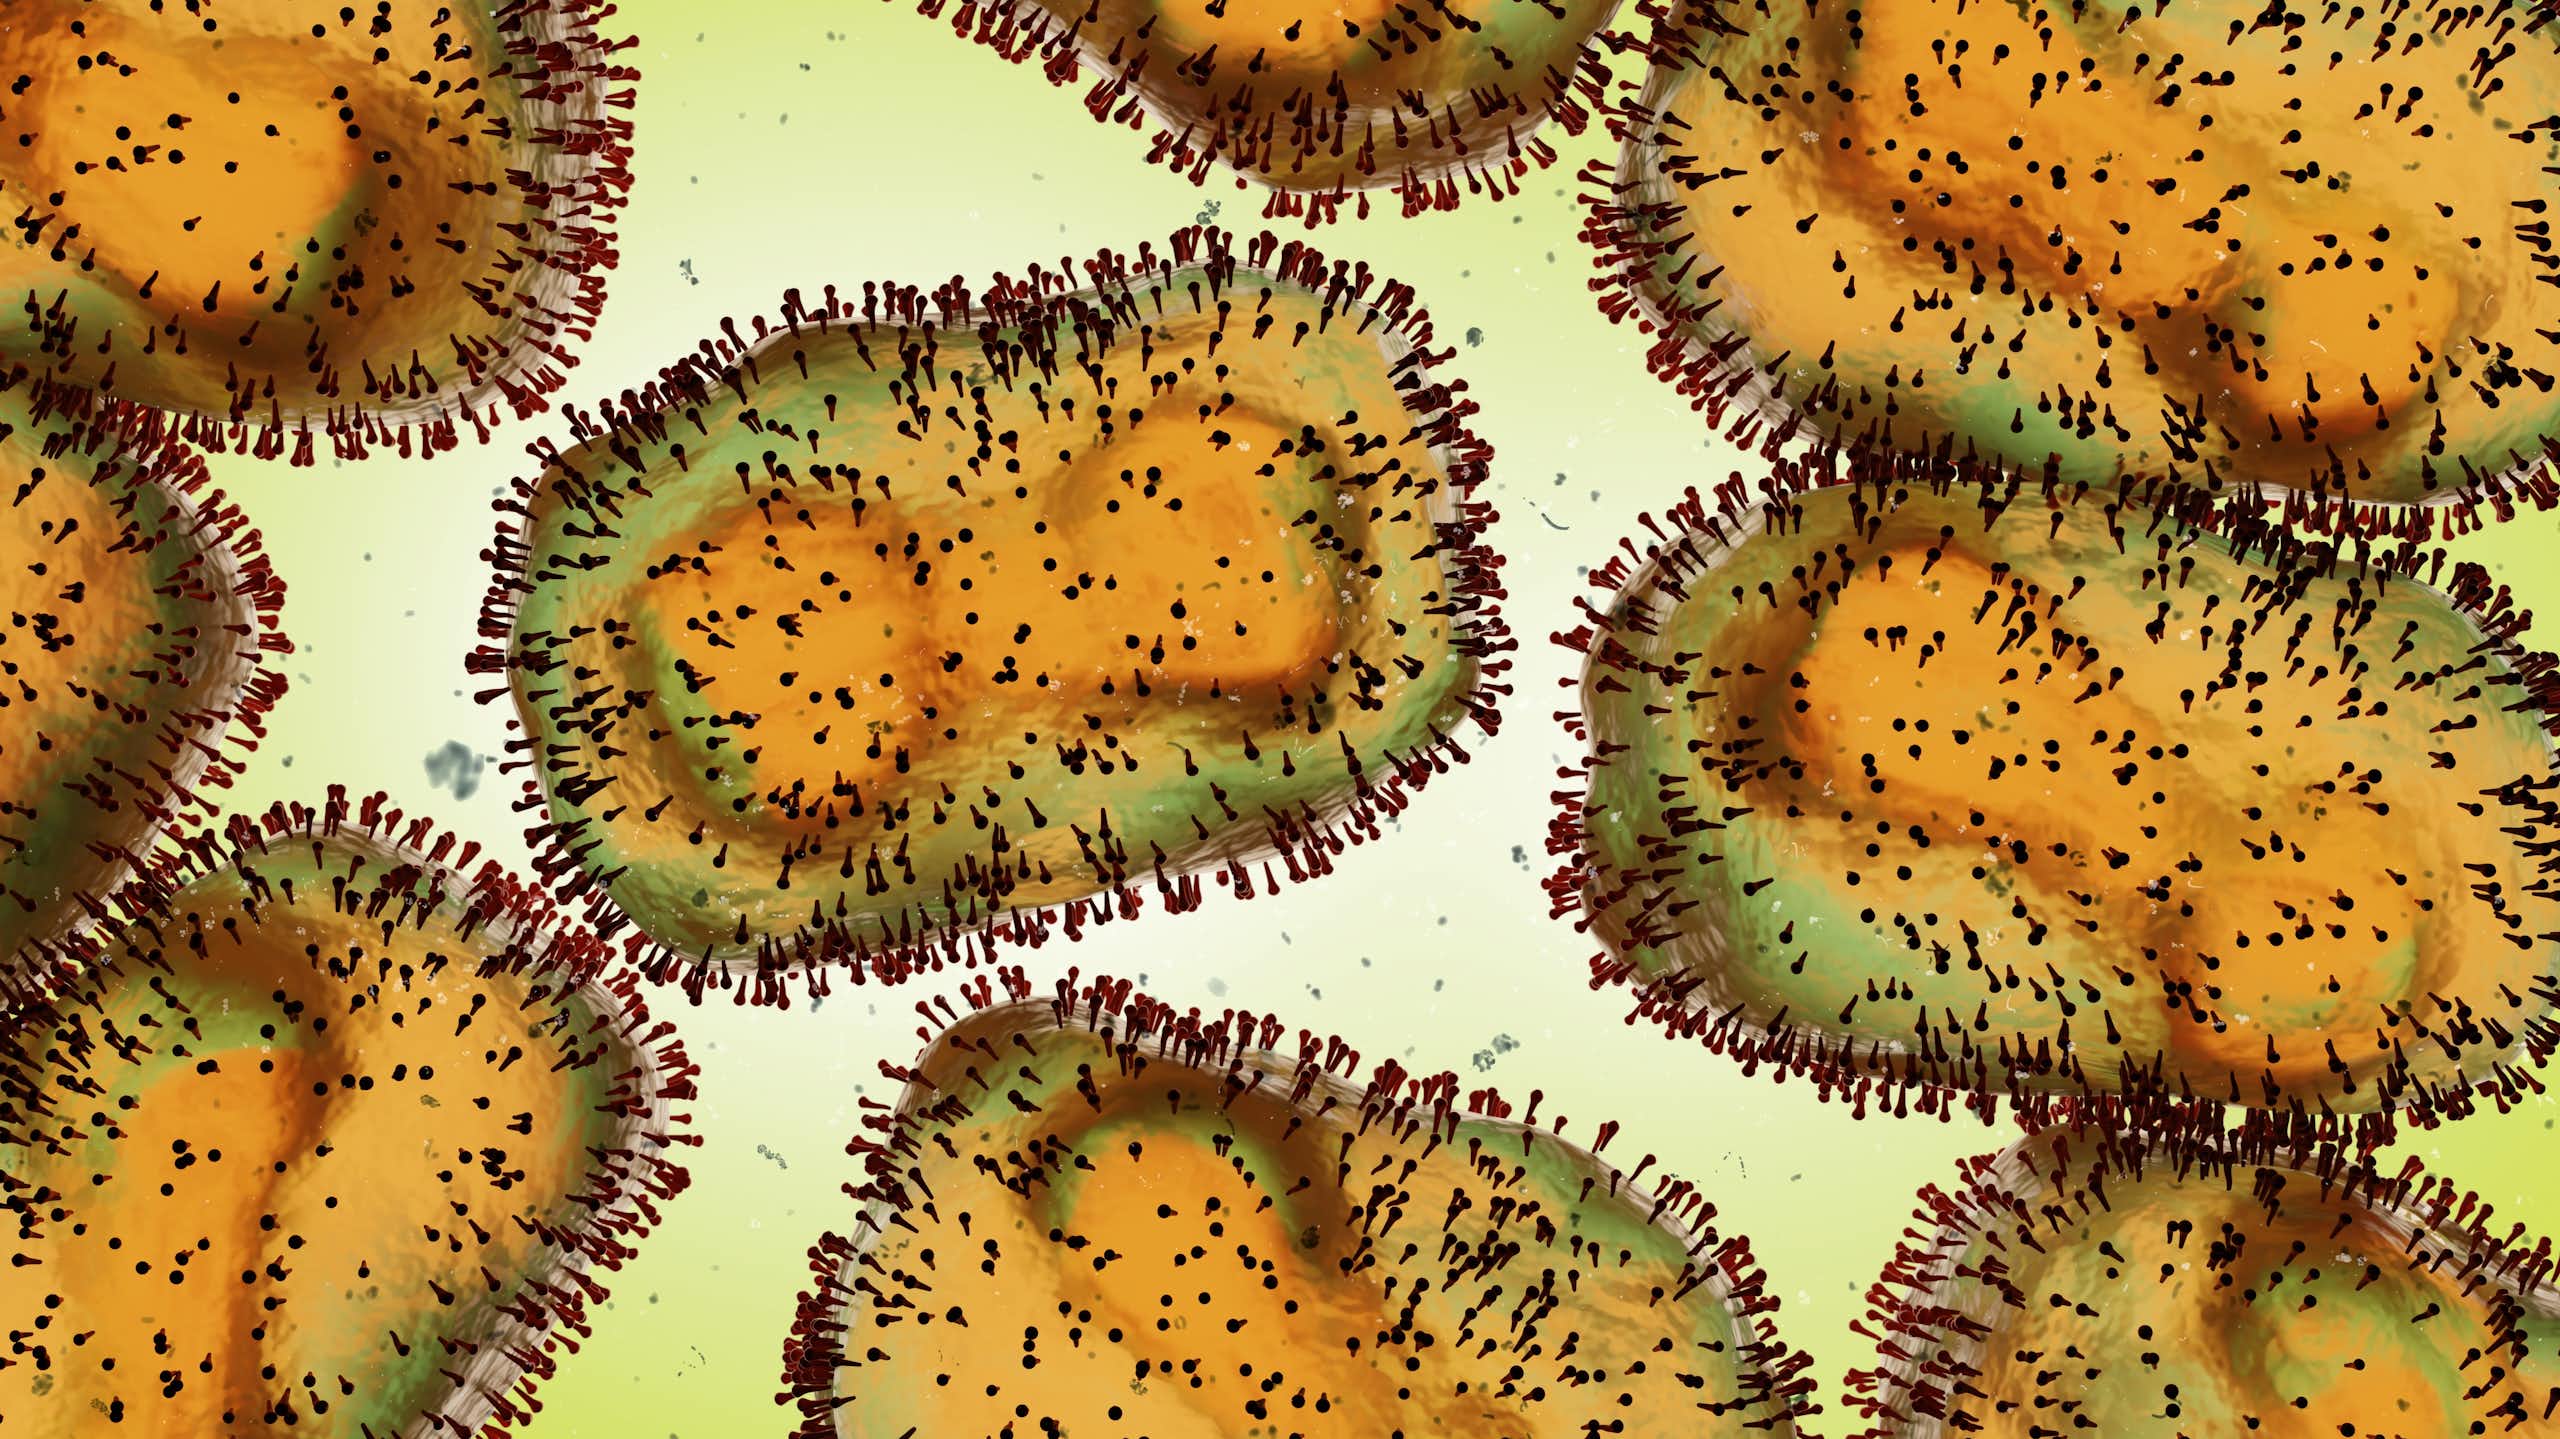 A digital rendering of mpox viruses under a microscope.